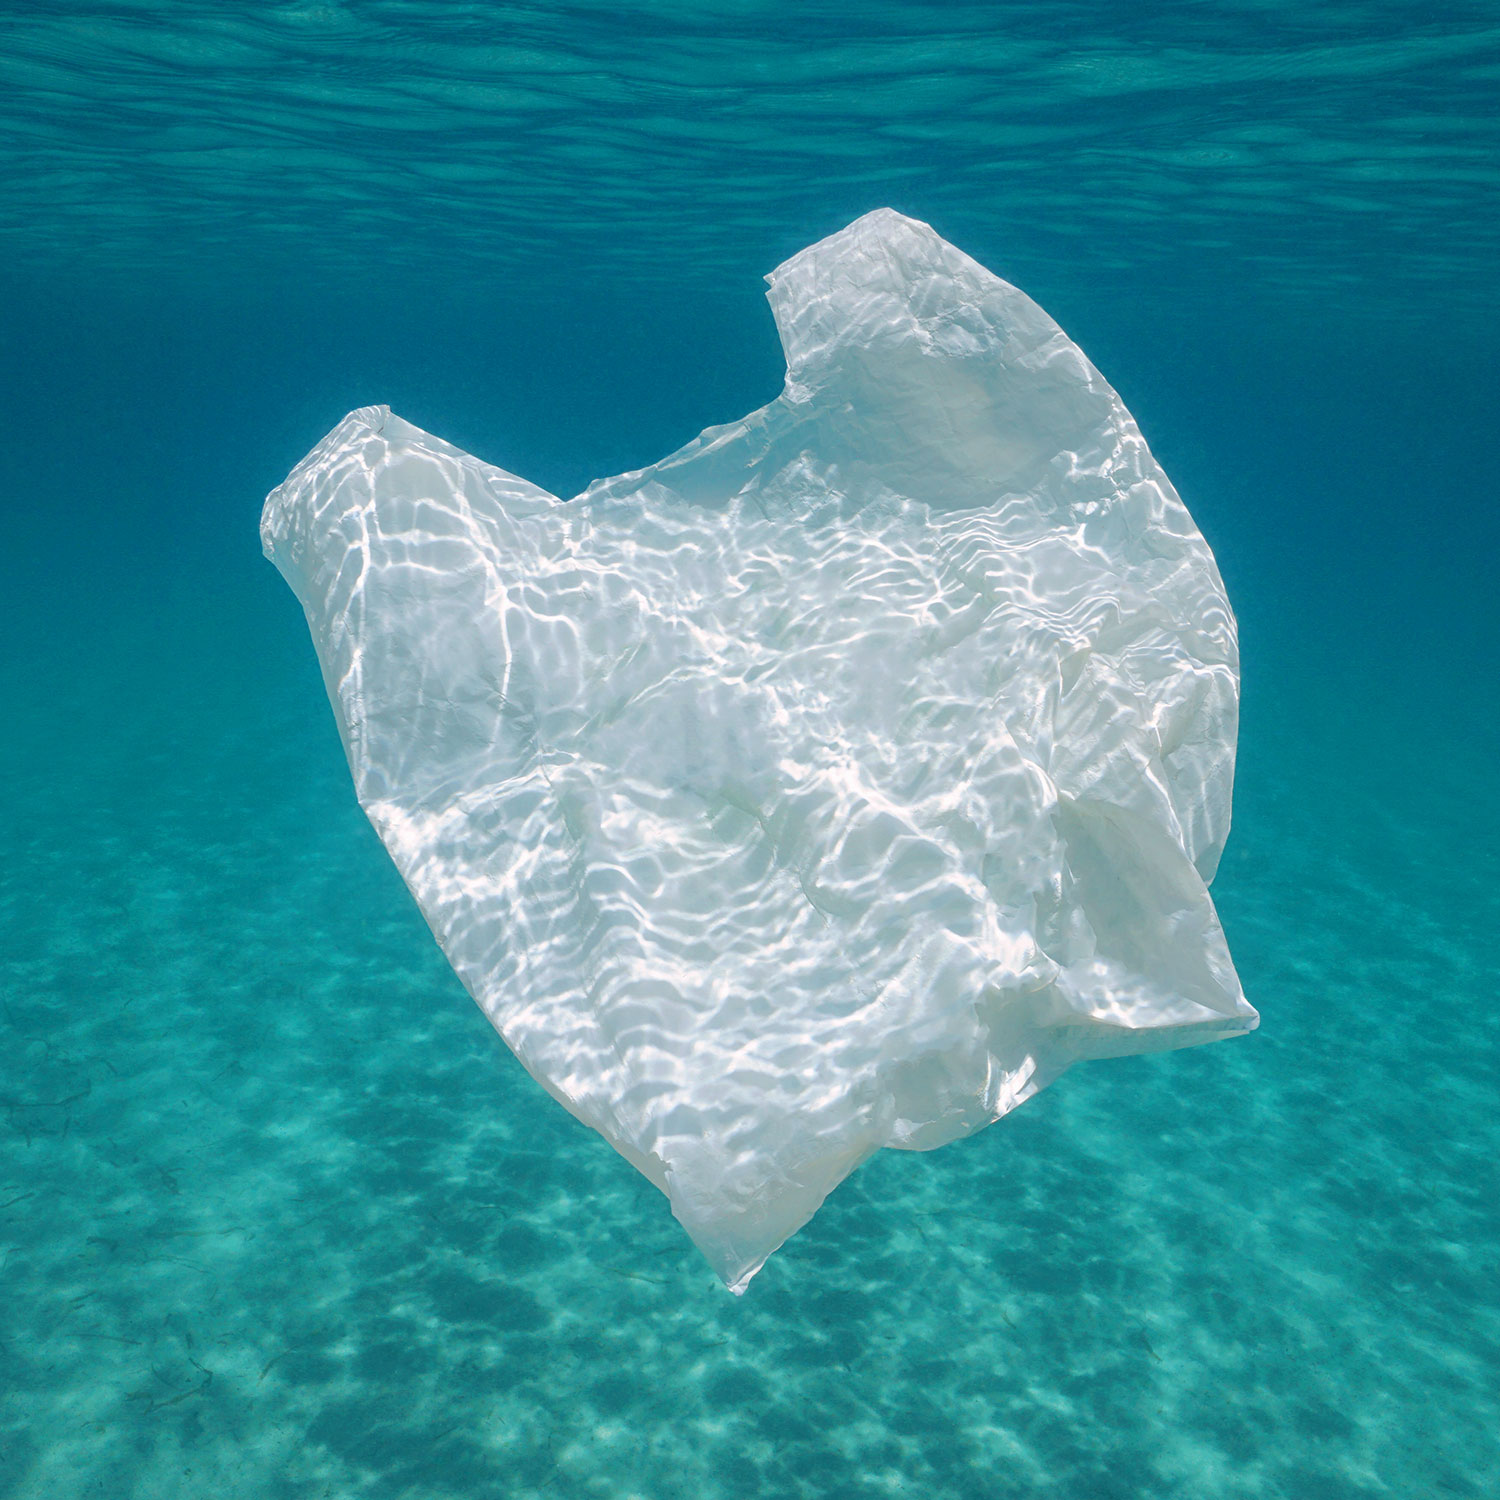 Image of single use plastic bag in water